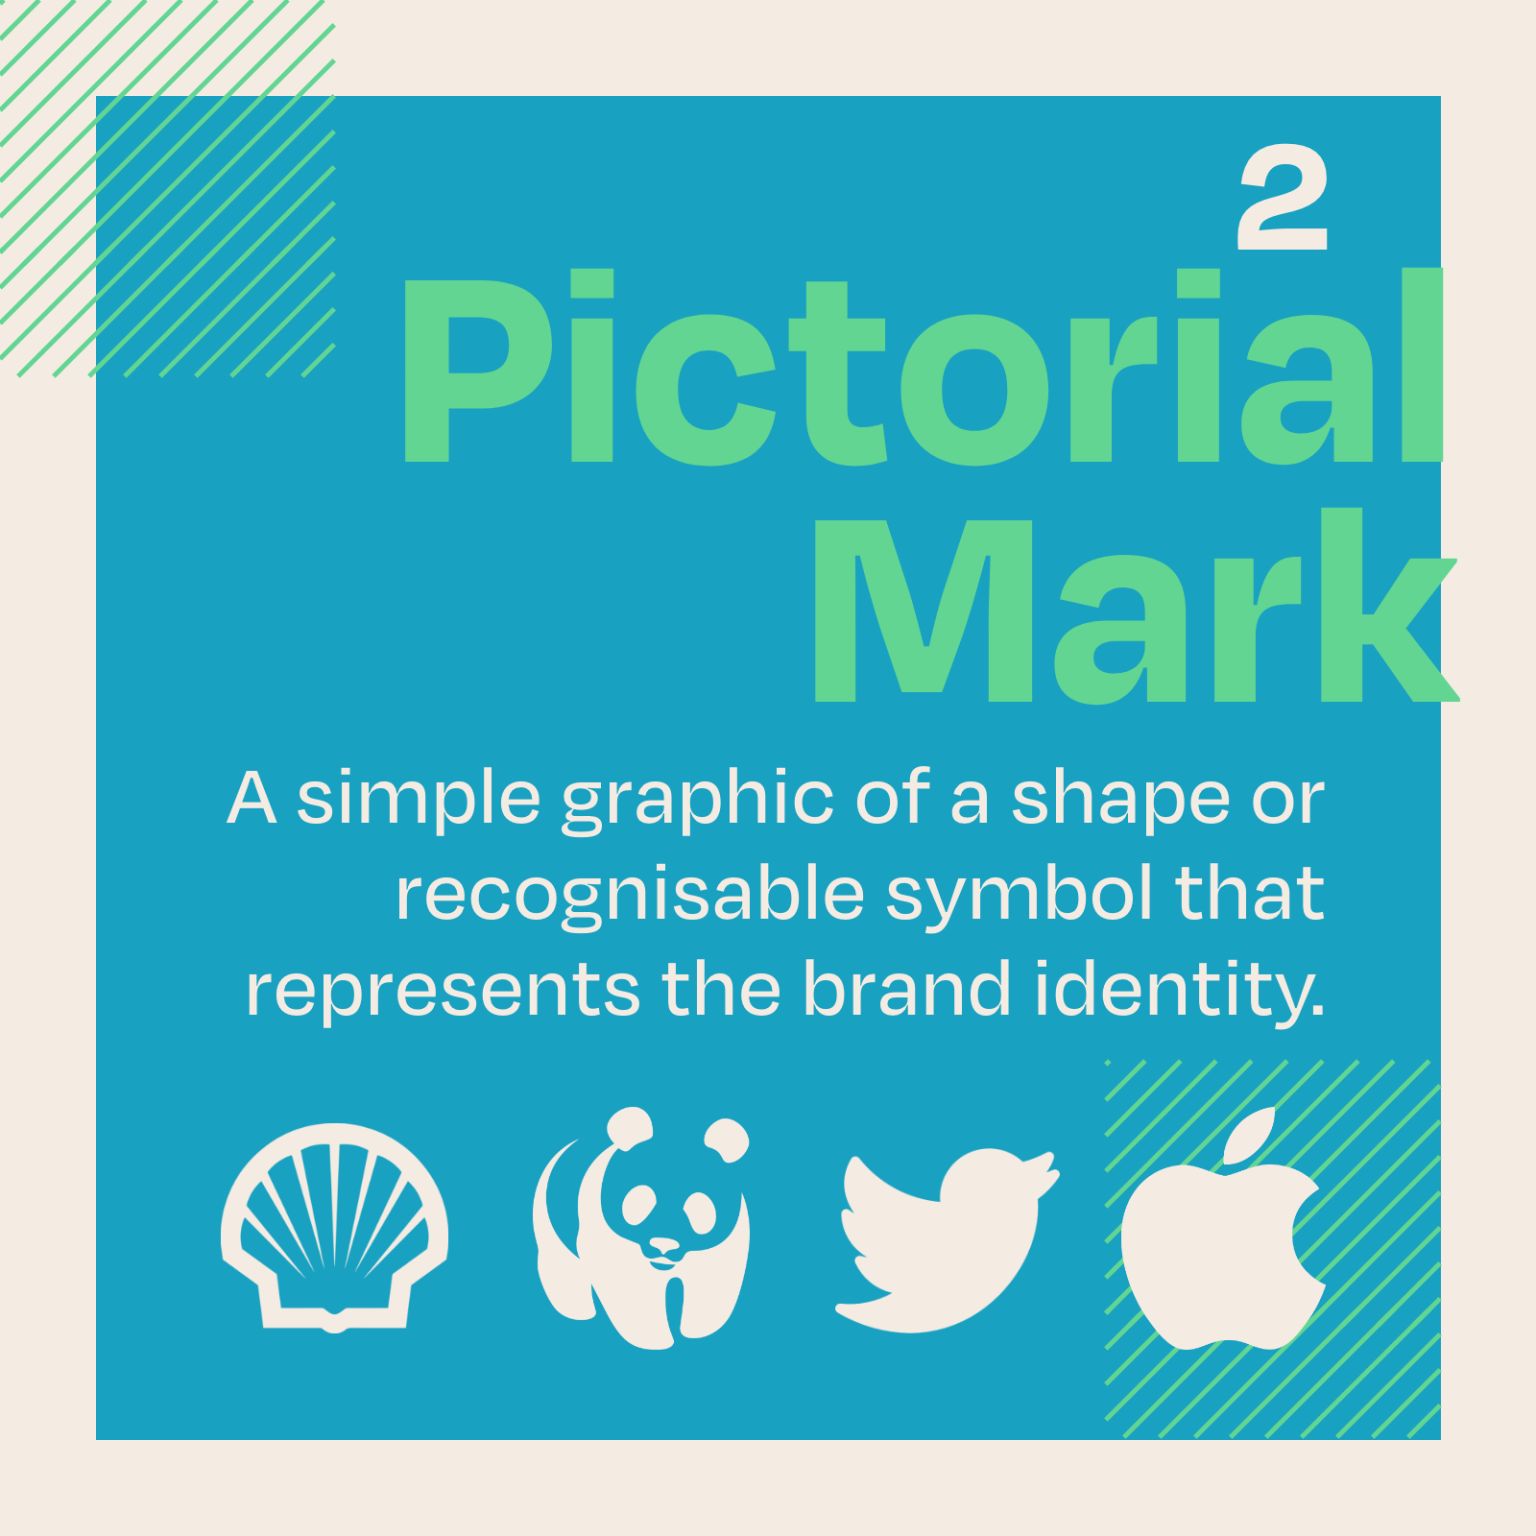 Types Of Logos - Pictorial Mark